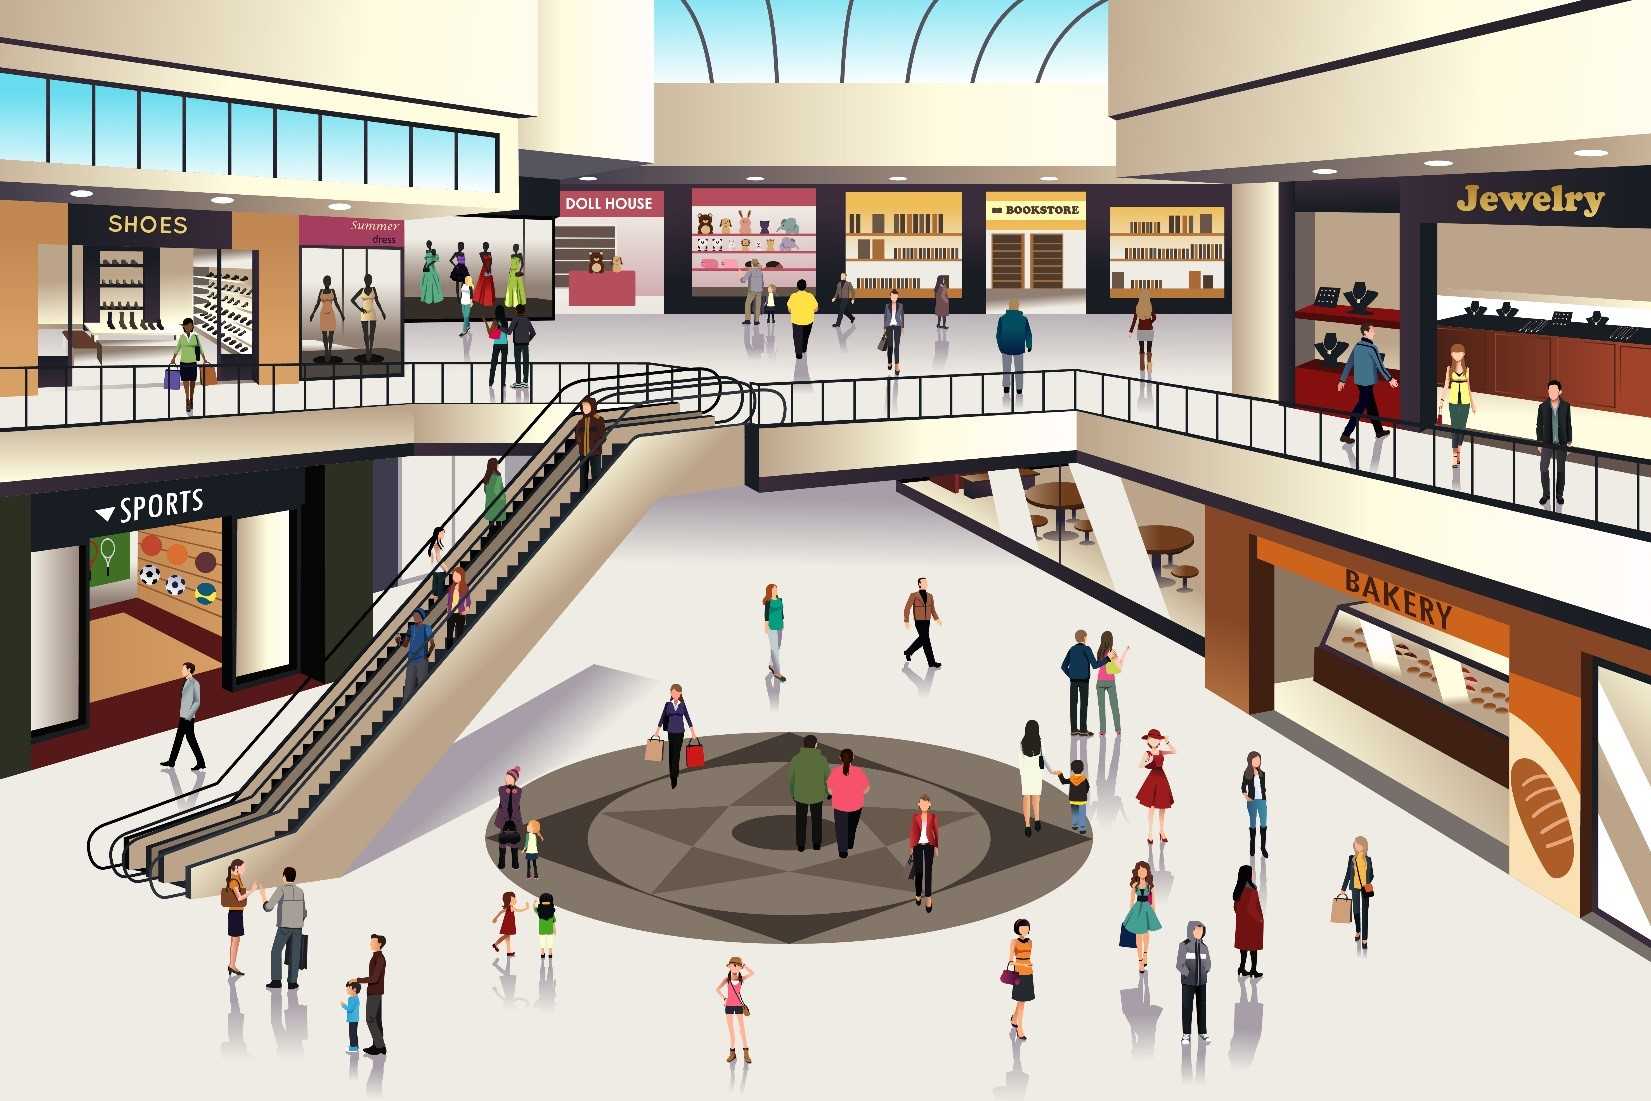 Image of shoppers walking in a mall